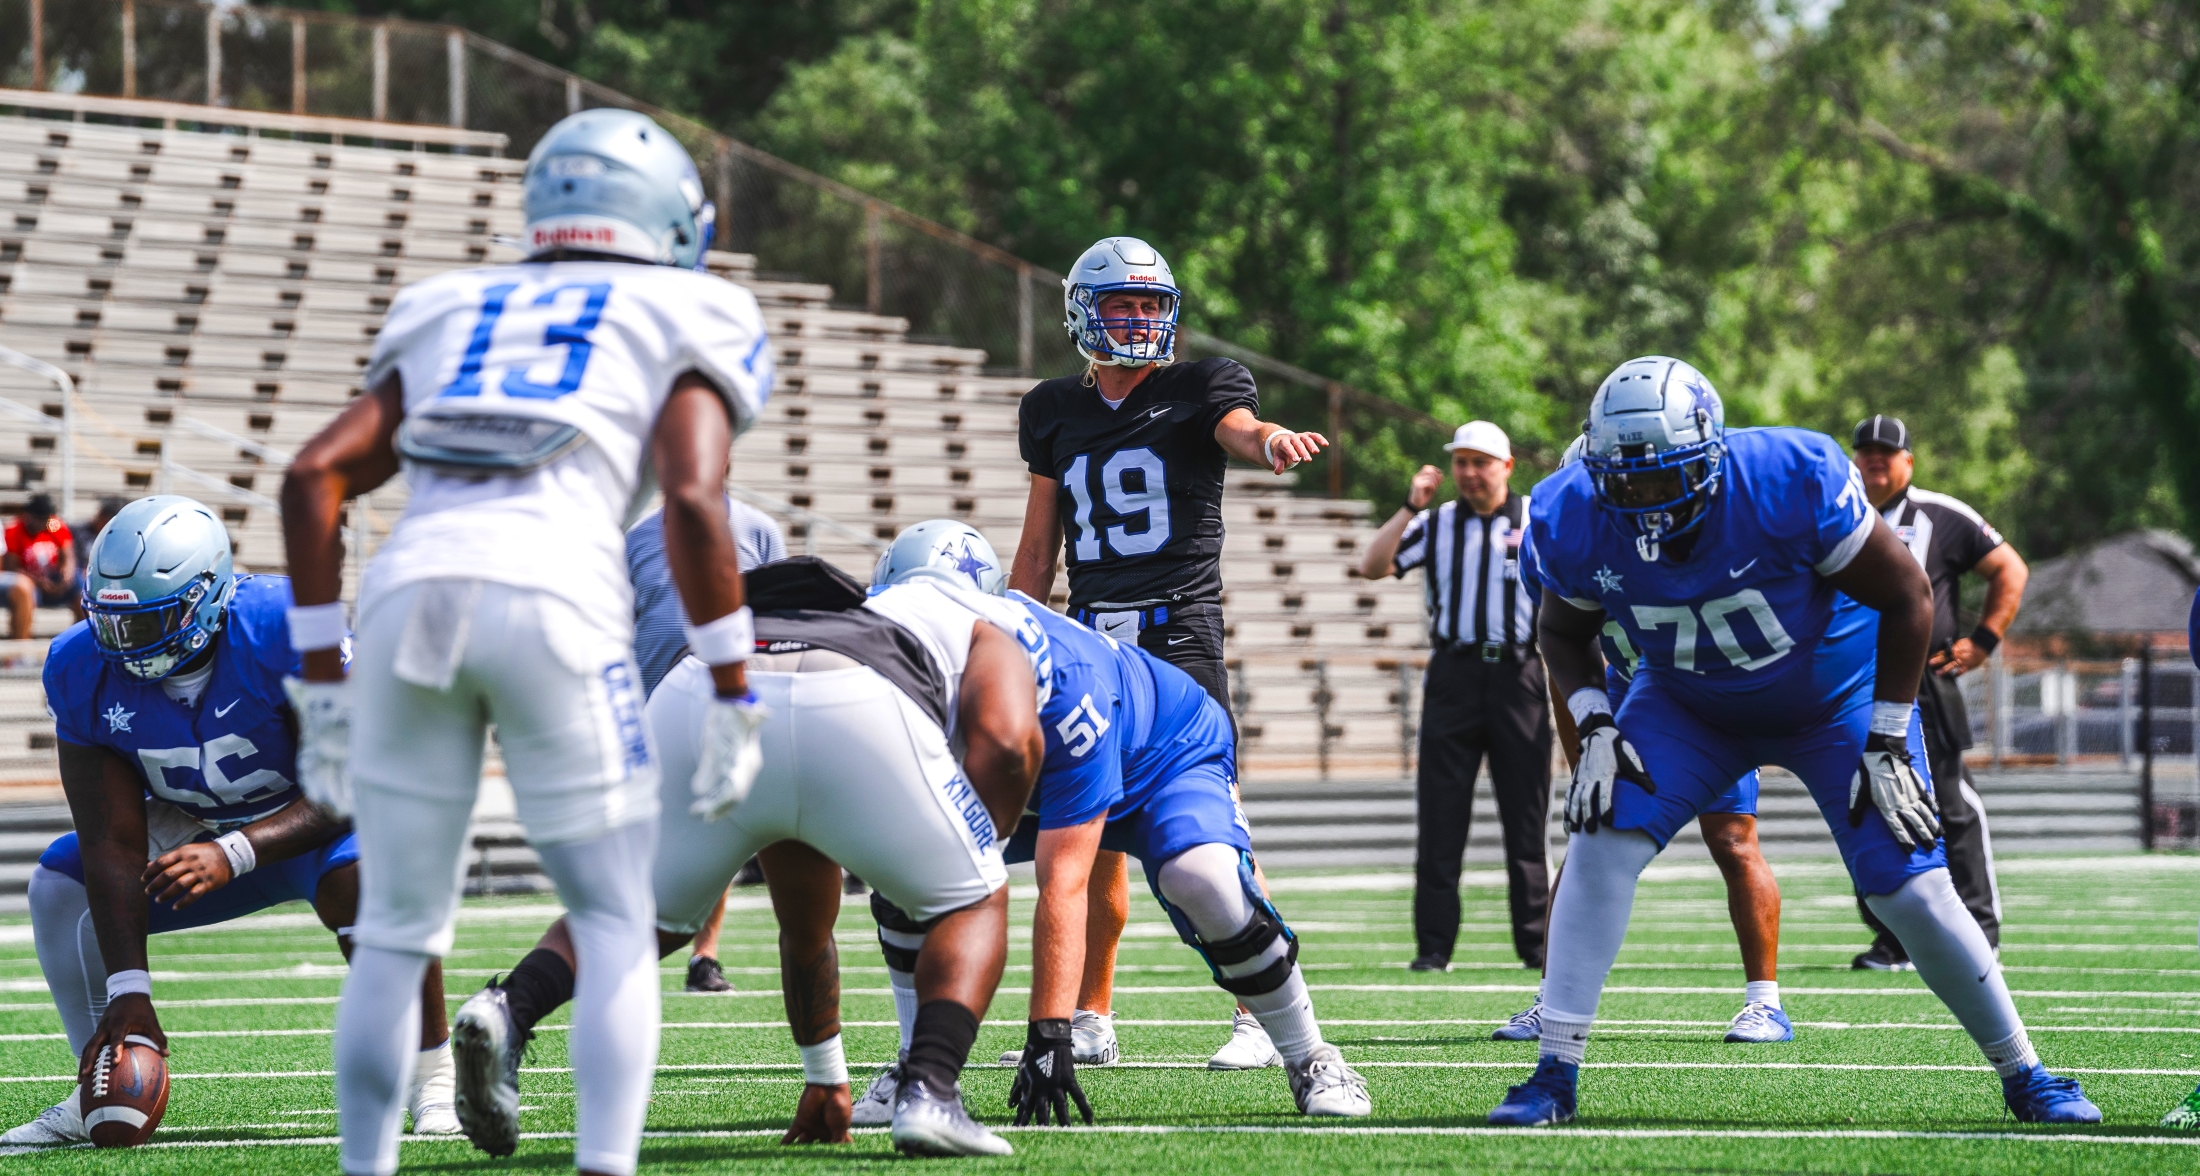 Kilgore College quarterback Tyler Webb (center) looking all Peyton Manning-like, under center for the KC spring game back on April 27. The Rangers, who have won the Southwest Junior College Football Conference championship the last two seasons, open their season August 24 at home against Monterrey Tech.